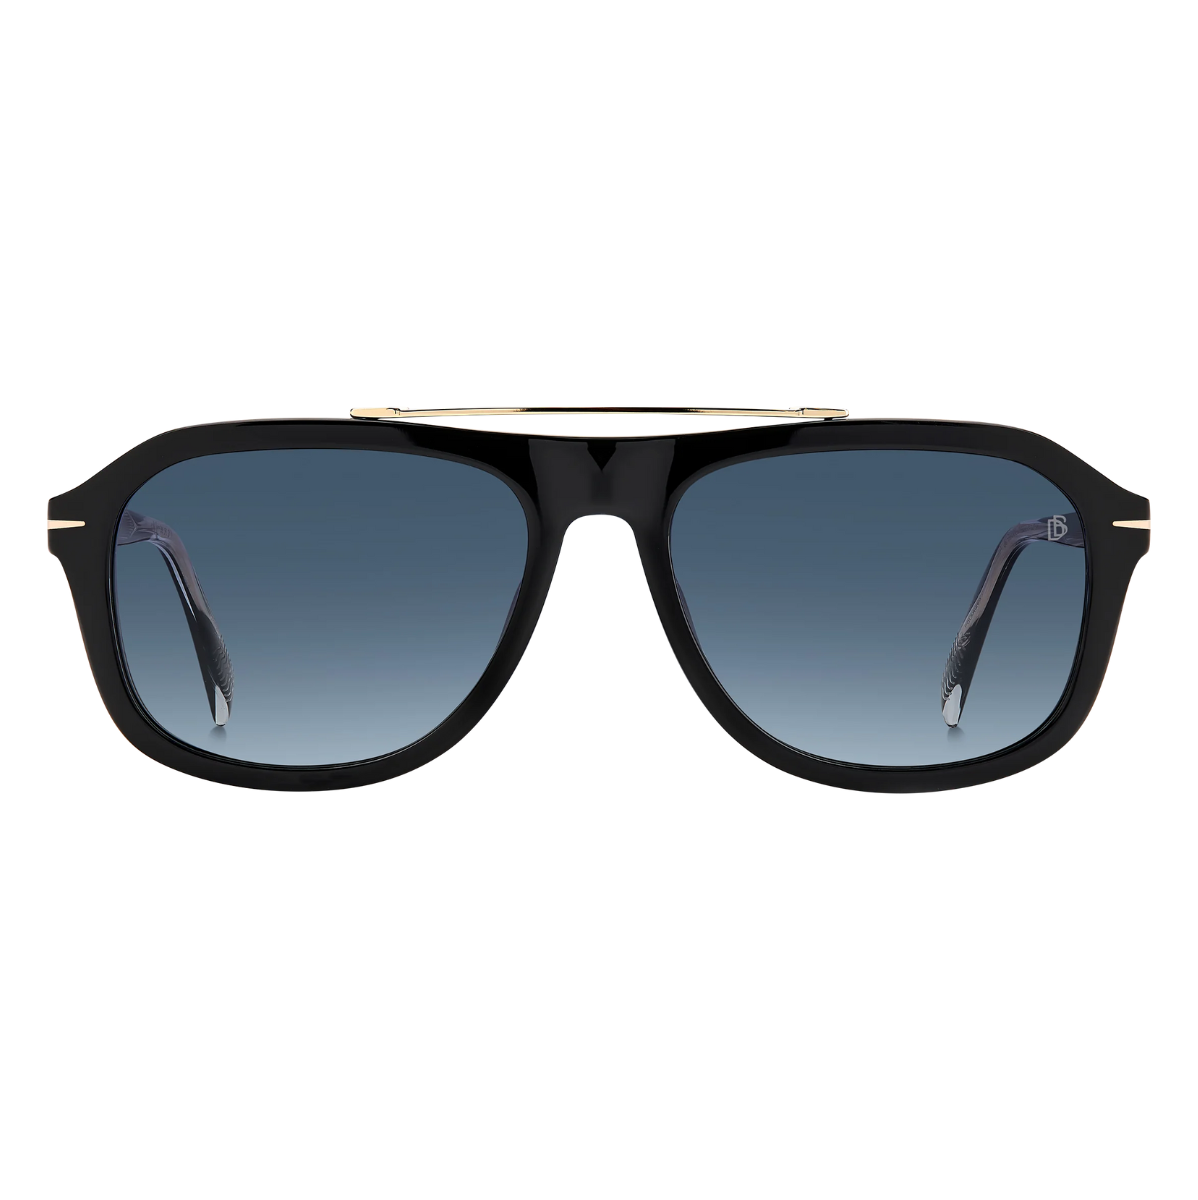 "David Beckham 7006 Sunglasses for Men: Trendy square and oval frame design in black acetate. Elevate your style with these high-quality shades."